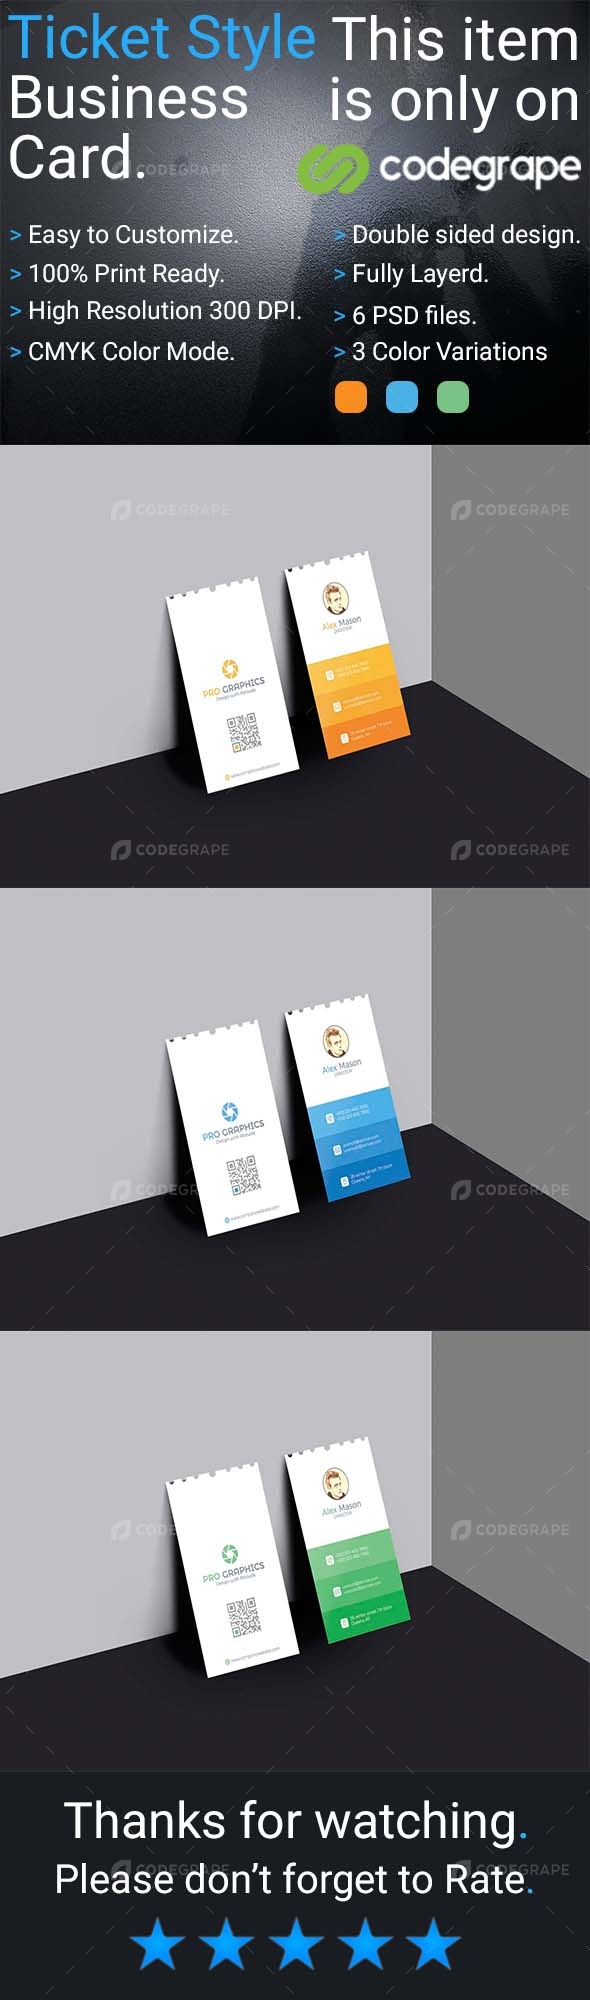 Corporate Ticket Style Business Card